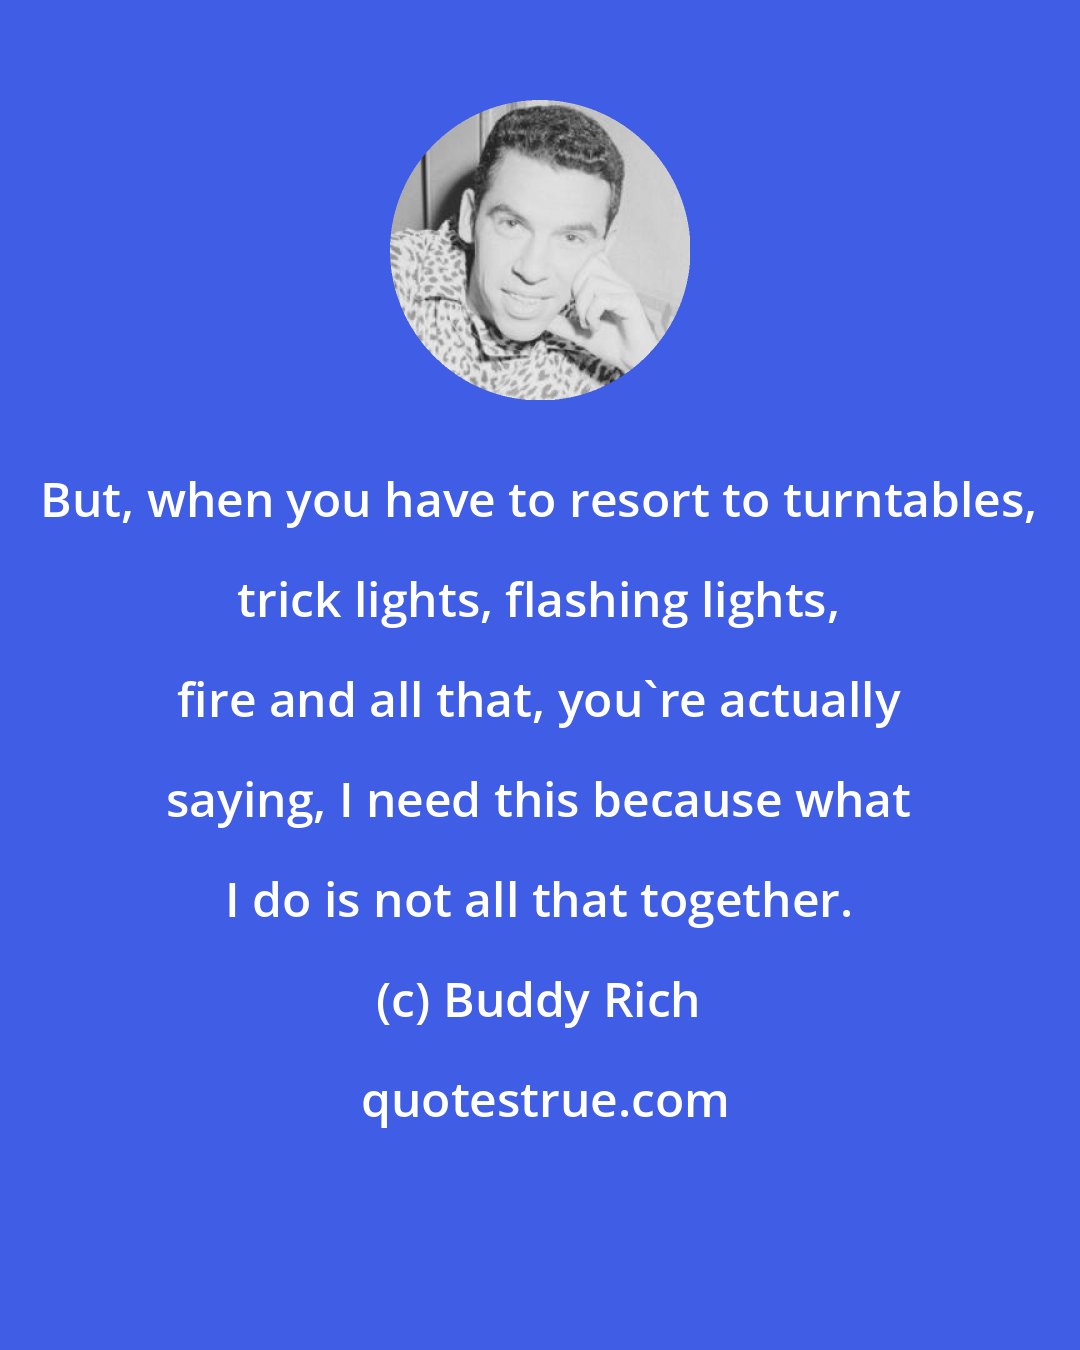 Buddy Rich: But, when you have to resort to turntables, trick lights, flashing lights, fire and all that, you're actually saying, I need this because what I do is not all that together.